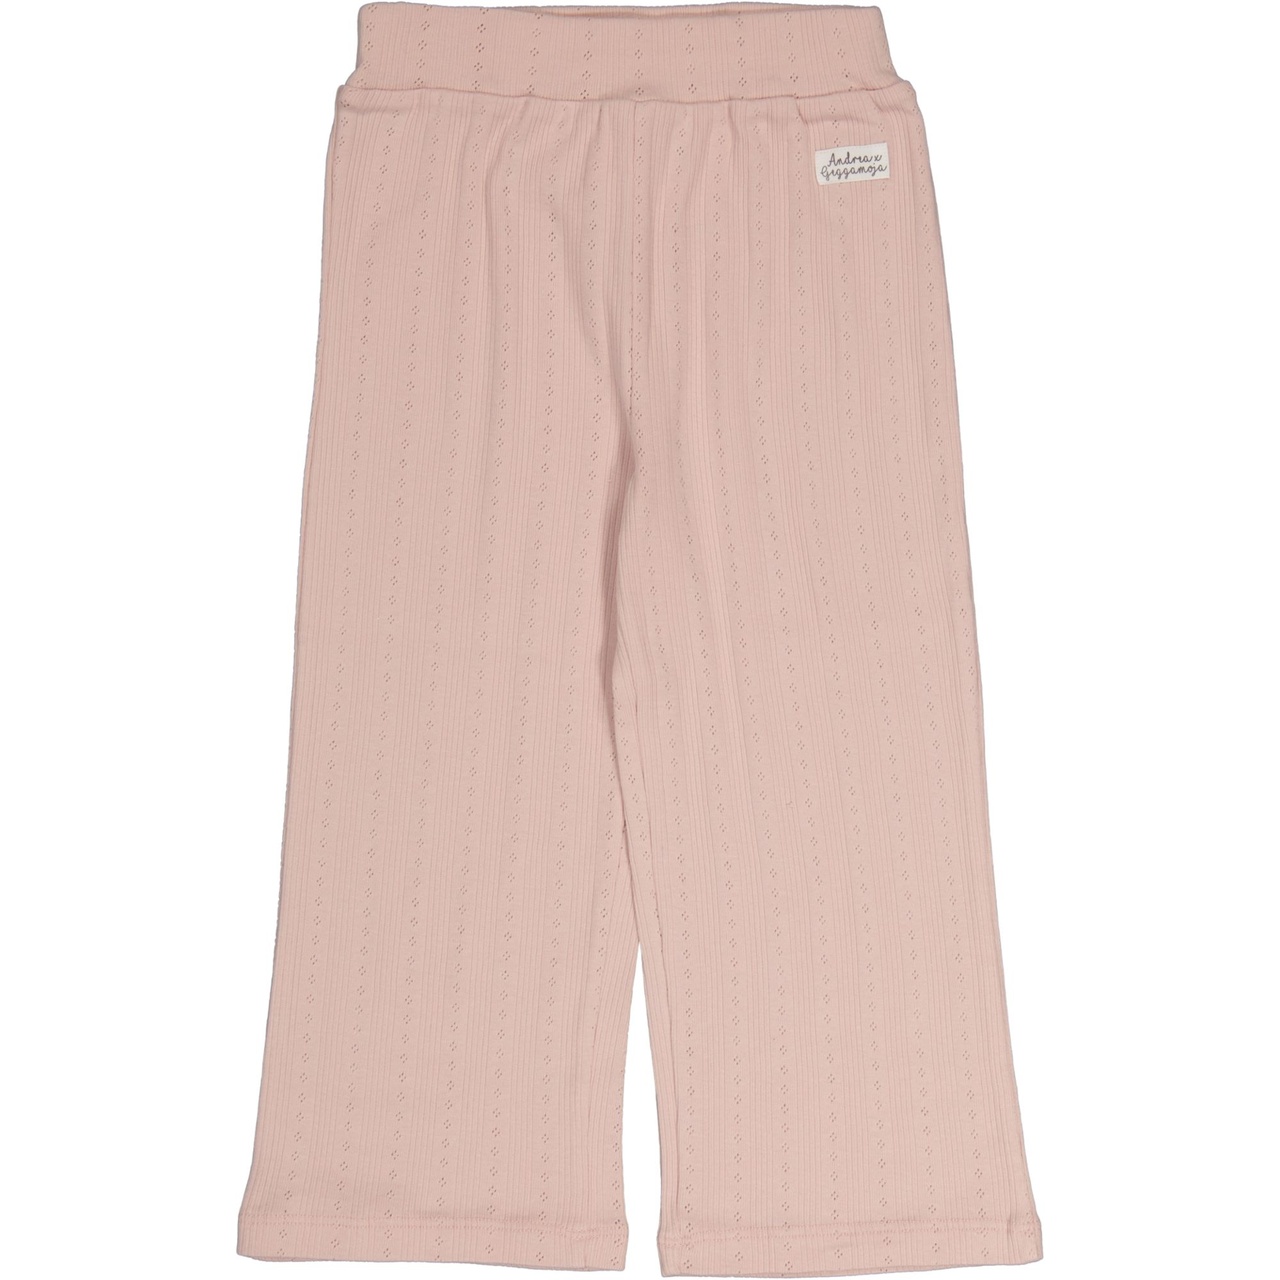 Trousers Pink Rose  110/116